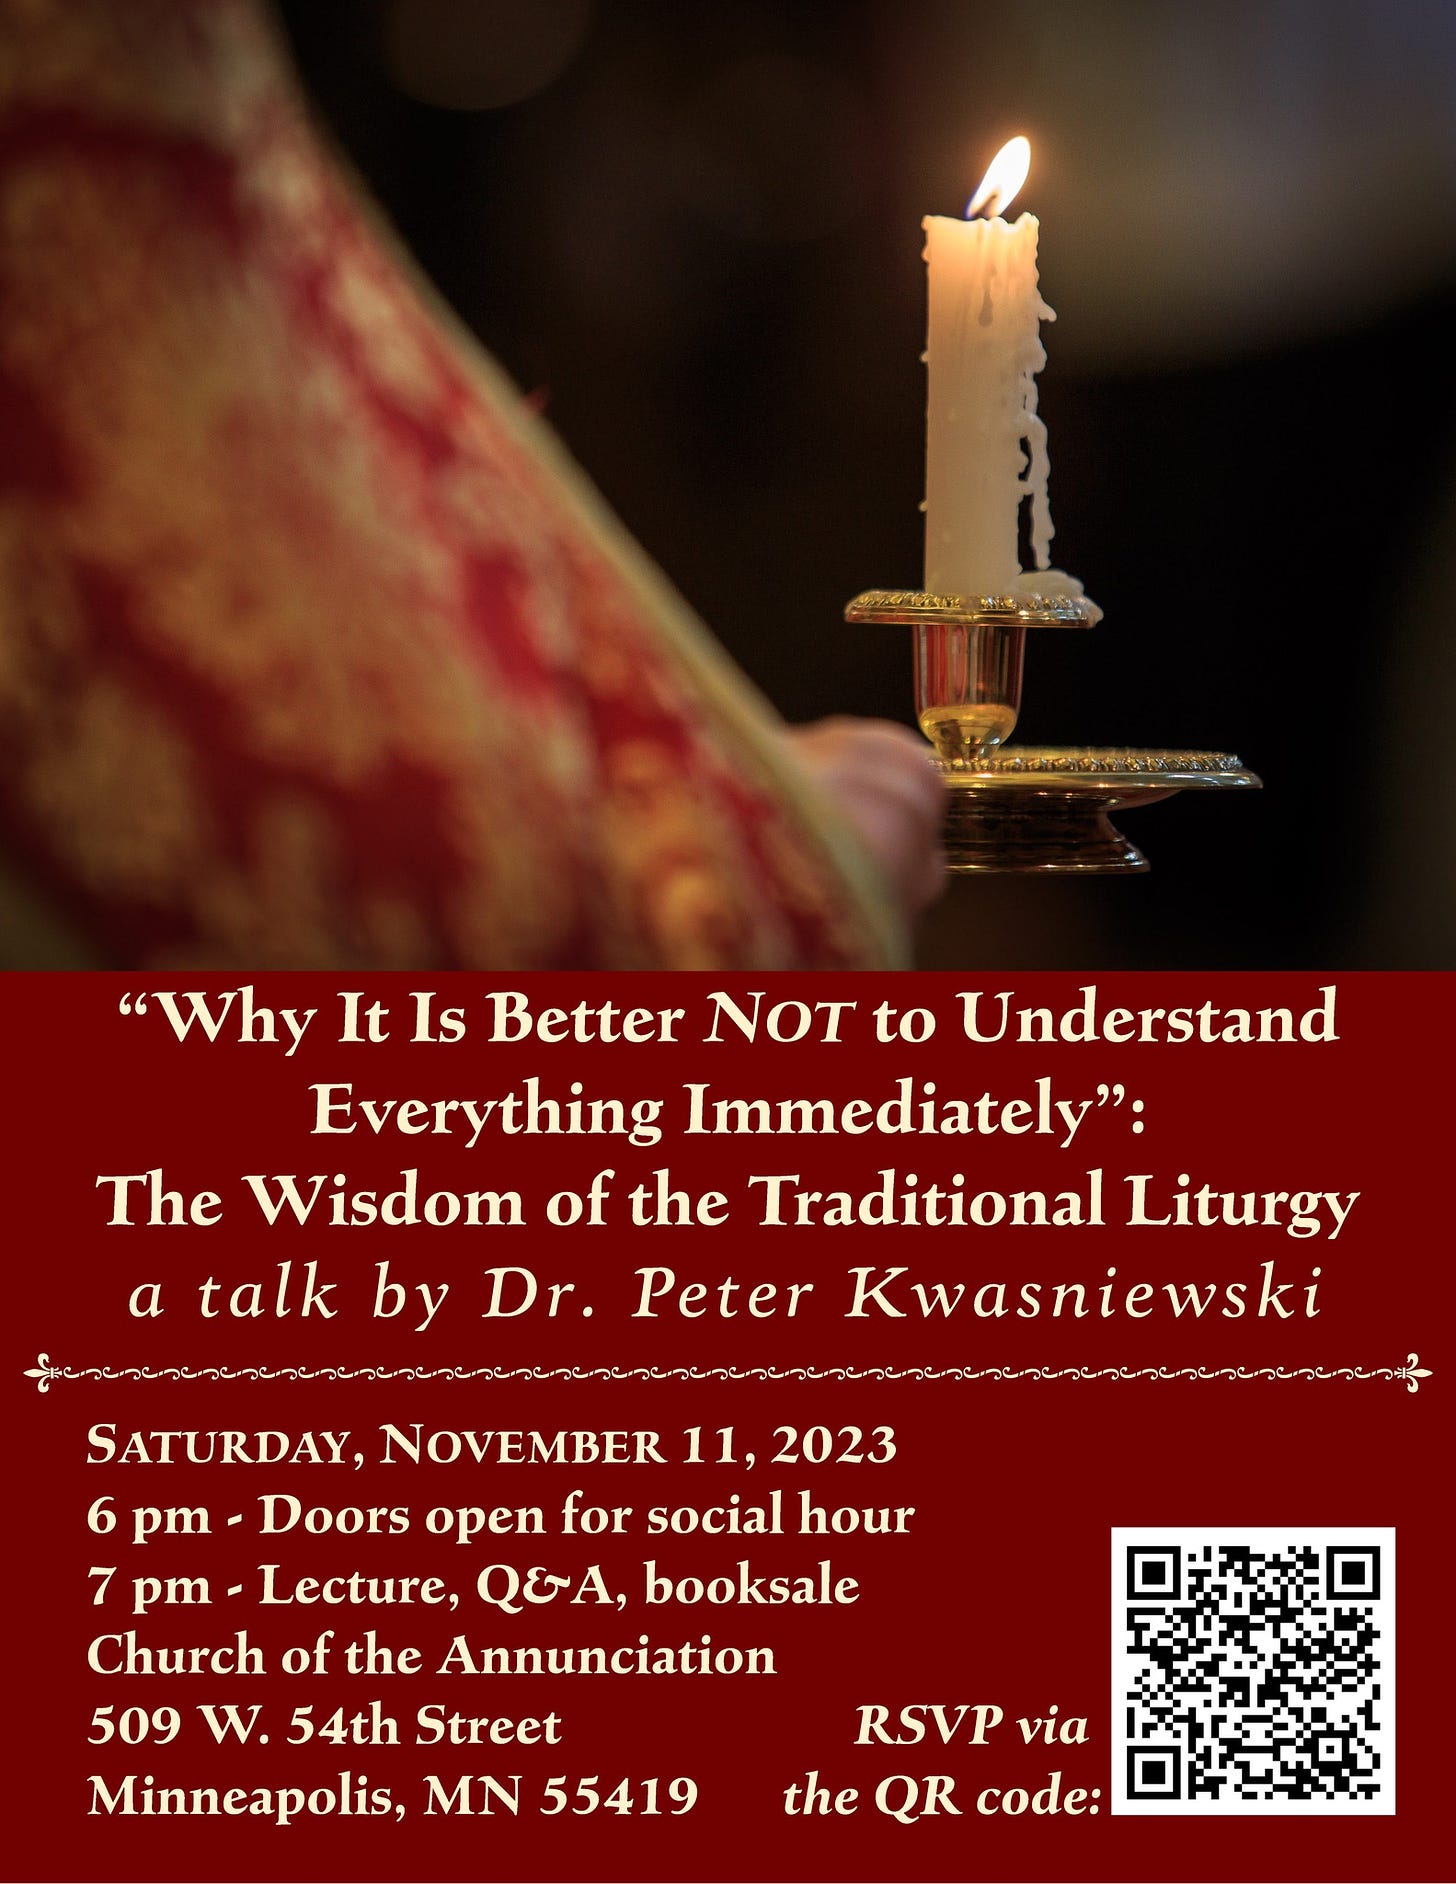 May be an image of ‎candle holder, pitcher plant and ‎text that says '‎"Why It Is Better NOT to Understand Everything Immediately": The Wisdom of the Traditional Liturgy a talk by Dr. Peter Kwasniewski שרישרישר SATURDAY, NOVEMBER 11, 2023 6 pm- Doors open for social hour 7 pm- Lecture, QEA, booksale Church of the Annunciation 509 W. 54th Street Minneapolis, MN 55419 RSVP via the QR code:‎'‎‎